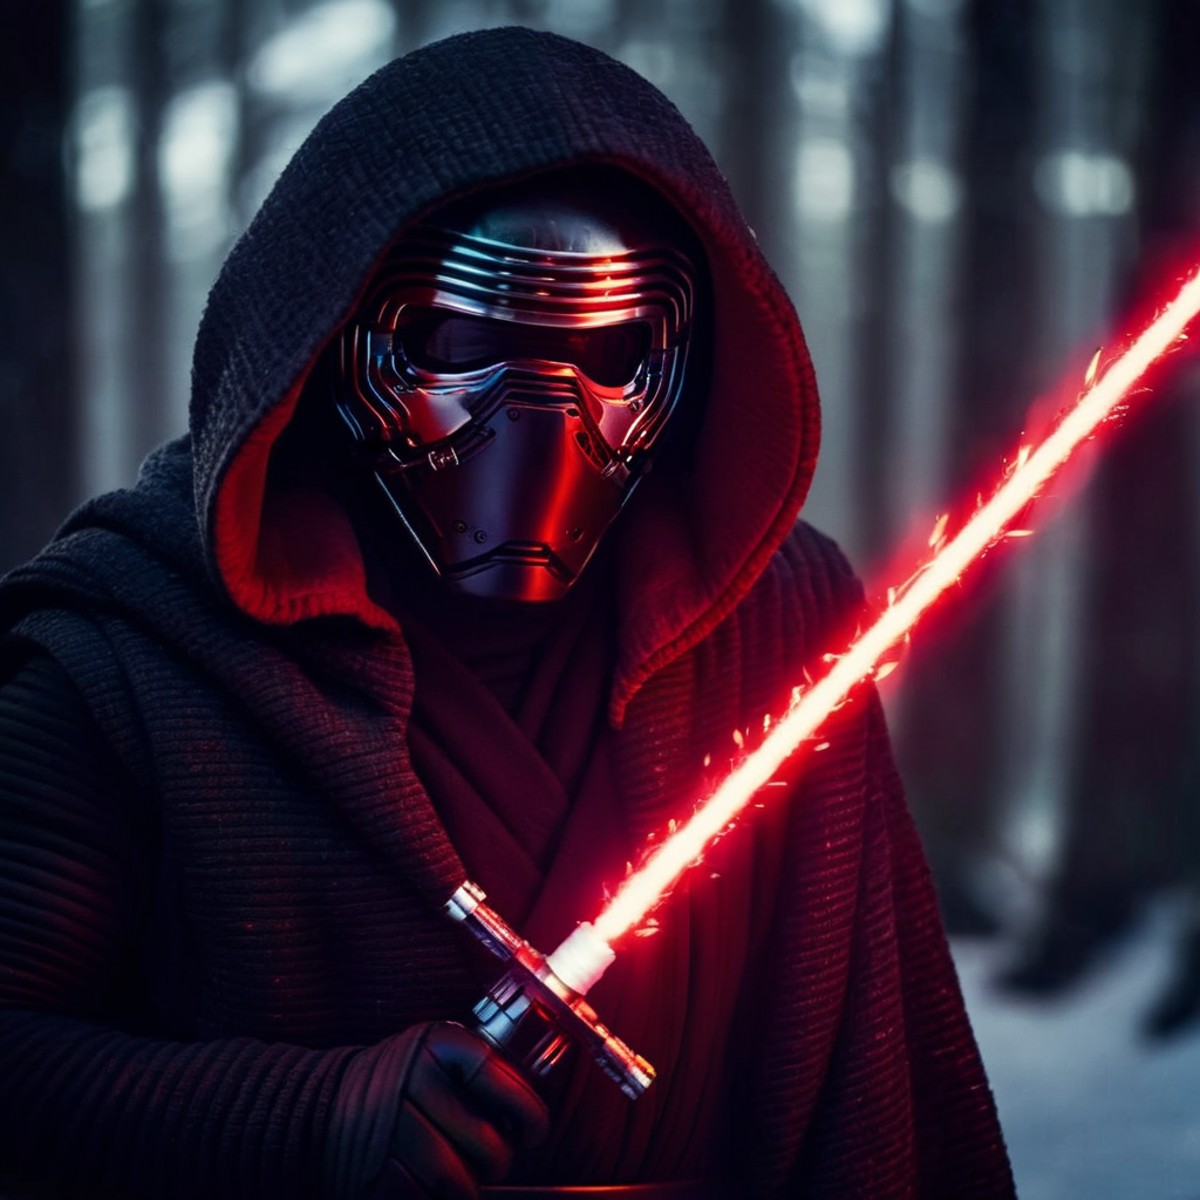 cinematic film still of  <lora:Kylo Ren:1.2>
Kylo Ren a realistic close up of a person with a red lightsaber and an epic h...